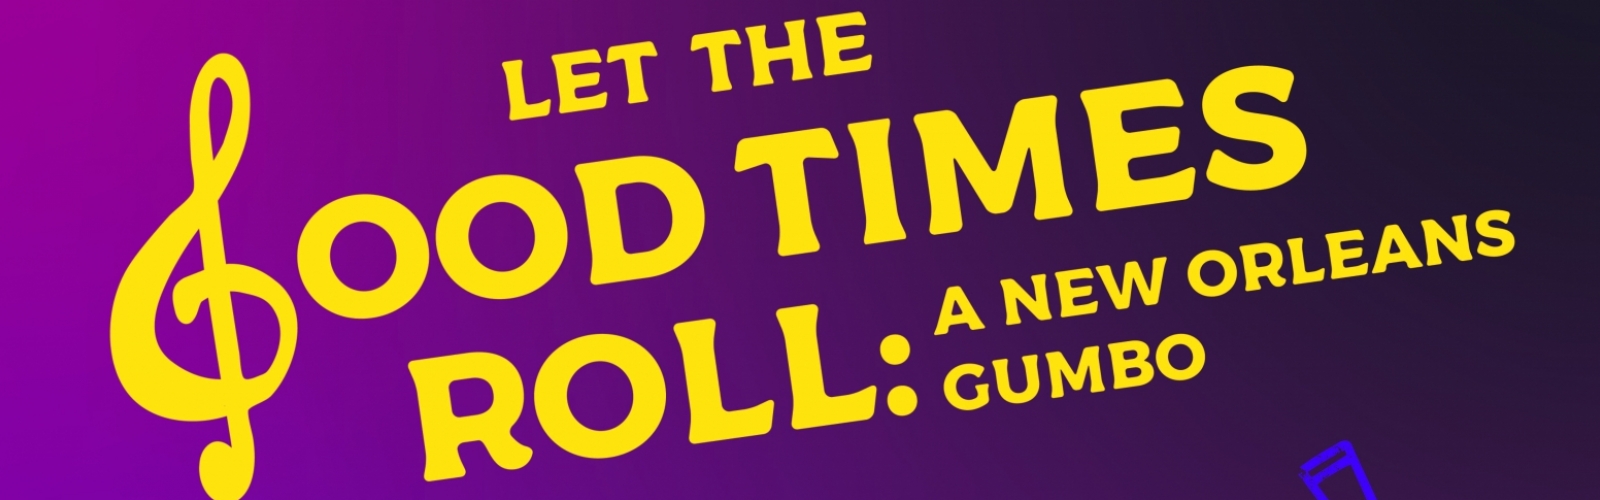 Let the Good Times Roll is in gold font at the top with a monochromatic figures around a piano keyboard on a blue background.